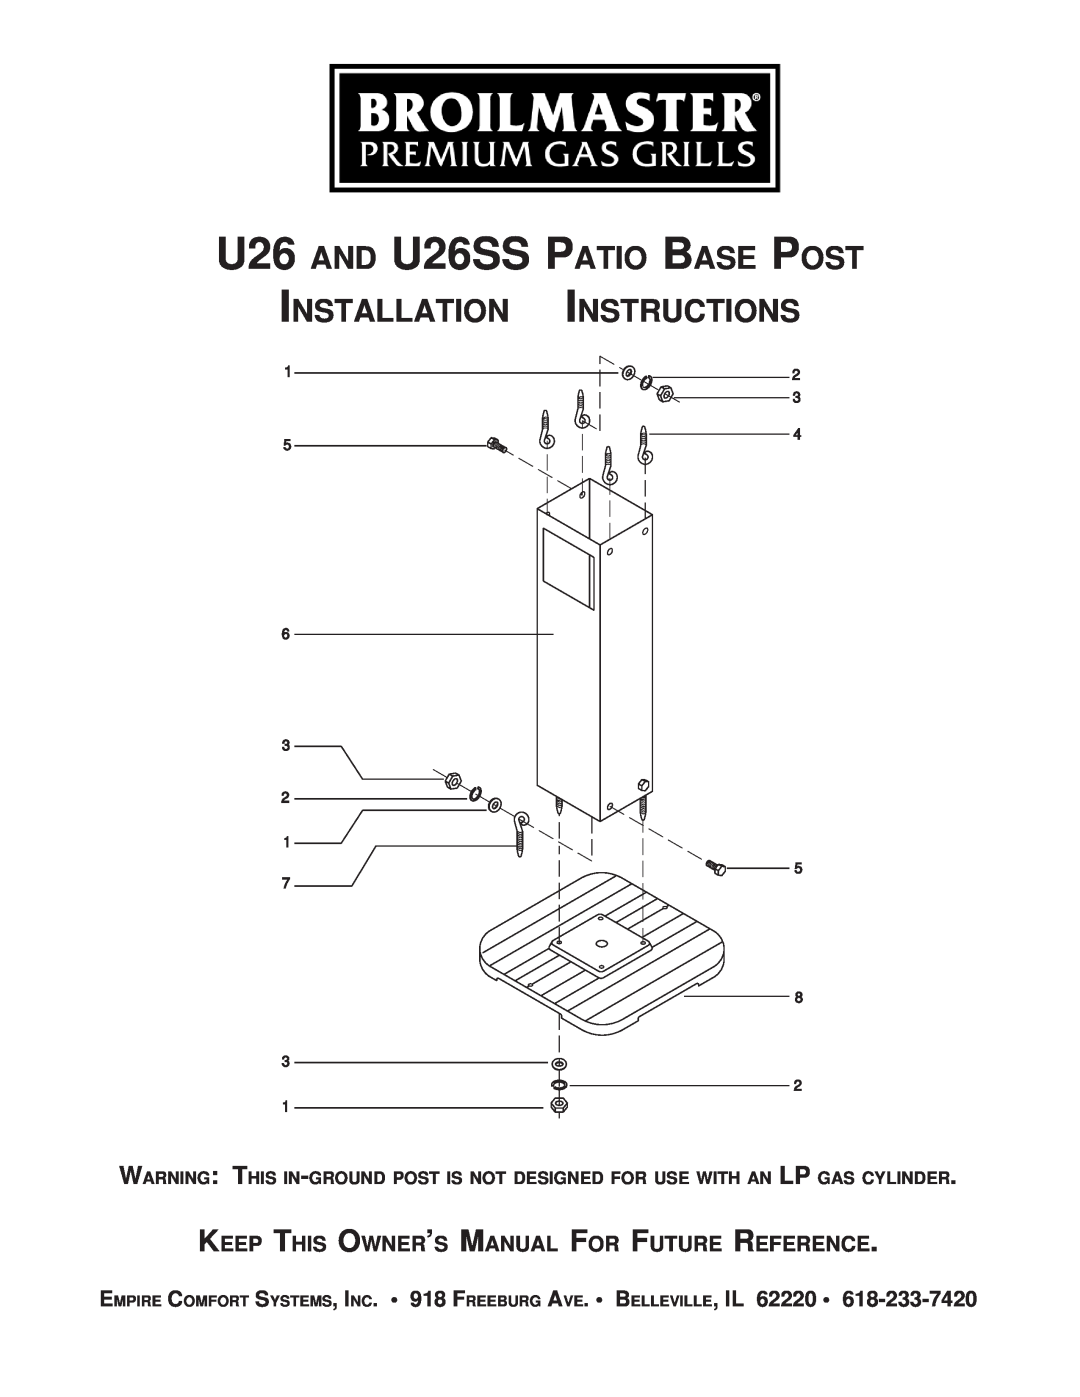 Broilmaster PB U26 AND U26SS PATIO BASE POST, Installation, Instructions, Keep This Owner’S Manual For Future Reference 